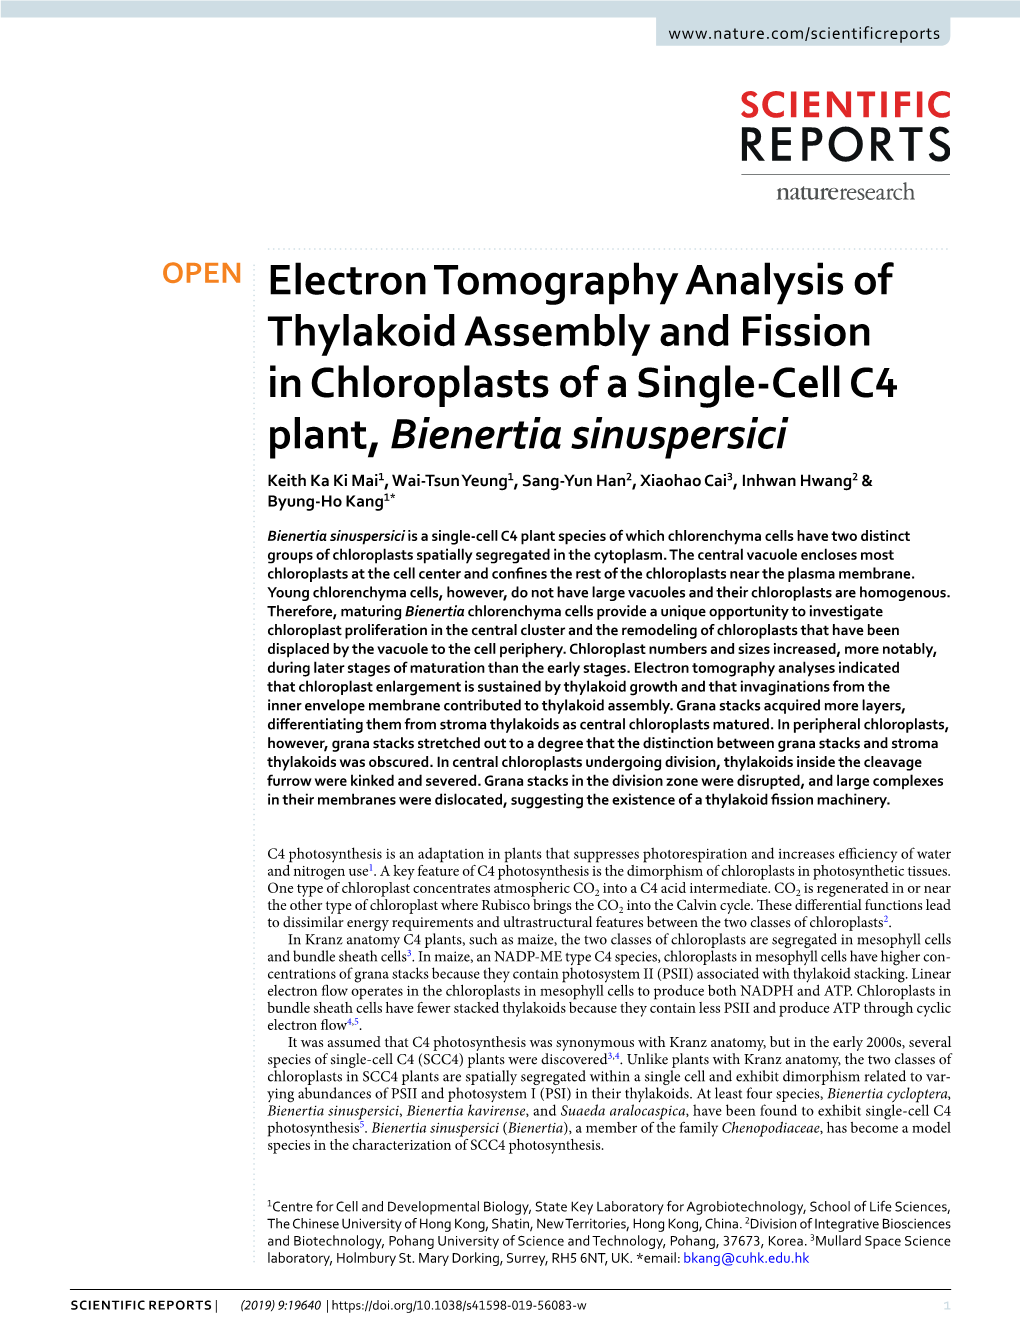 Electron Tomography Analysis of Thylakoid Assembly and Fission In